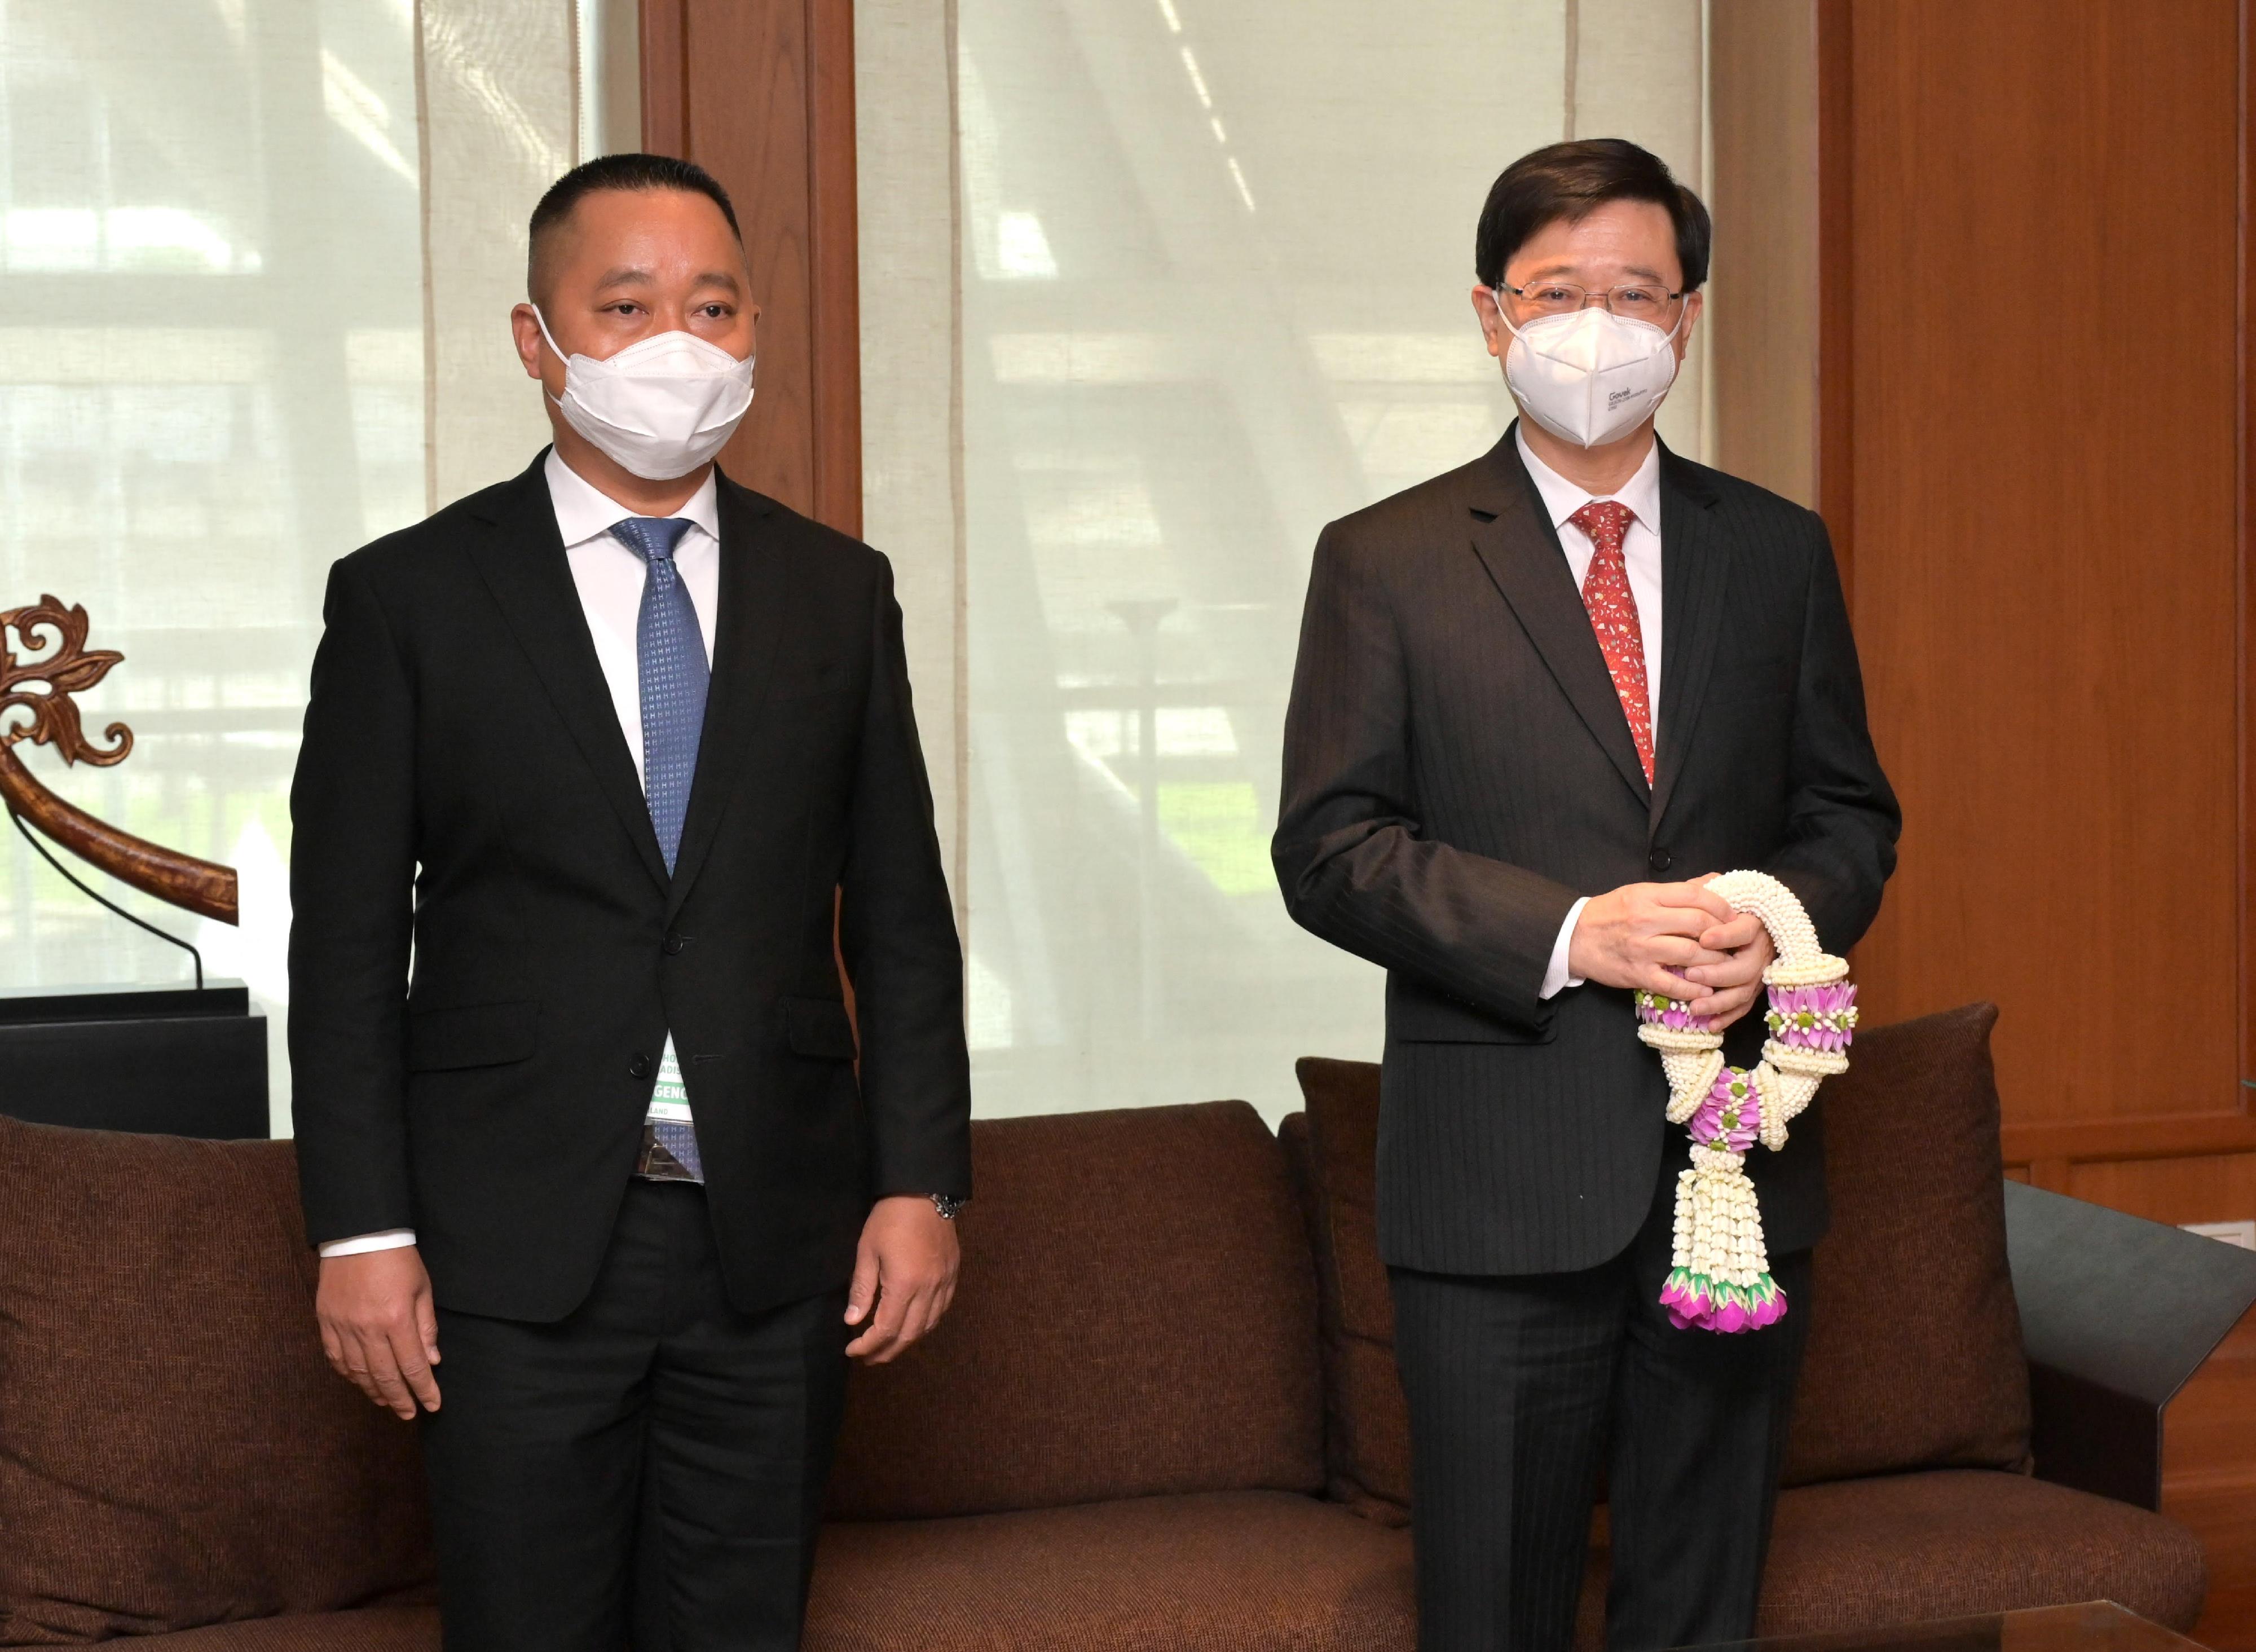 The Chief Executive, Mr John Lee, arrived in Bangkok, Thailand, this morning (November 17) to attend the Asia-Pacific Economic Cooperation 2022 Economic Leaders’ Meeting and other related meetings. Photo shows Mr Lee (right) meeting with the Vice Minister for Office of the Prime Minister of Thailand, Mr Ronaphop Patamadis (left), at the airport.